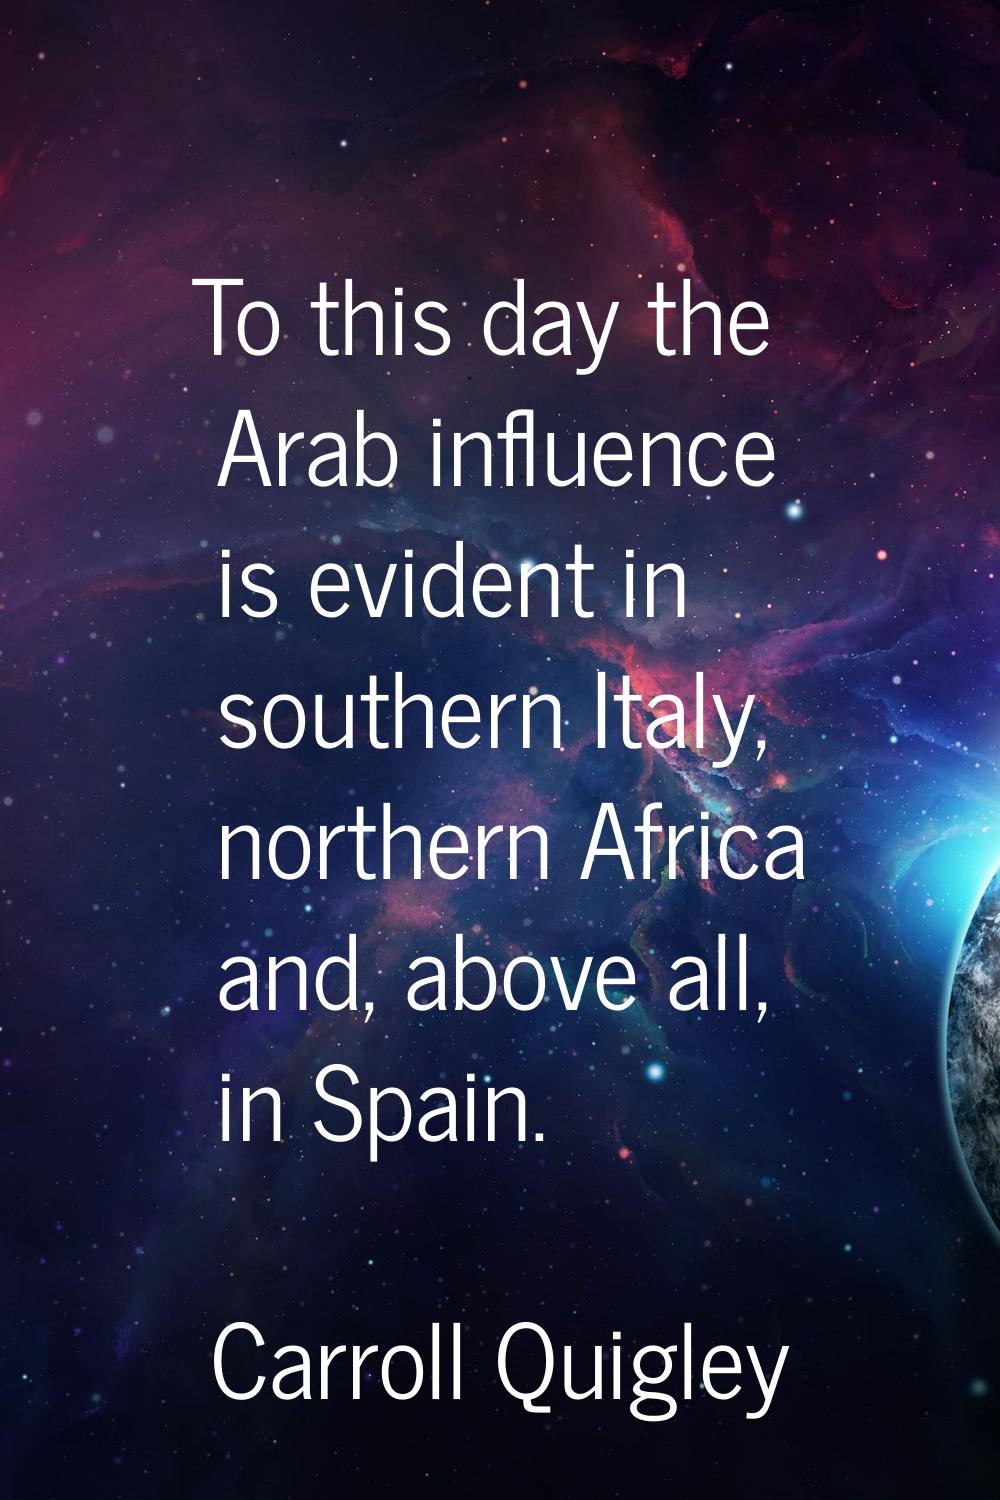 To this day the Arab influence is evident in southern Italy, northern Africa and, above all, in Spa